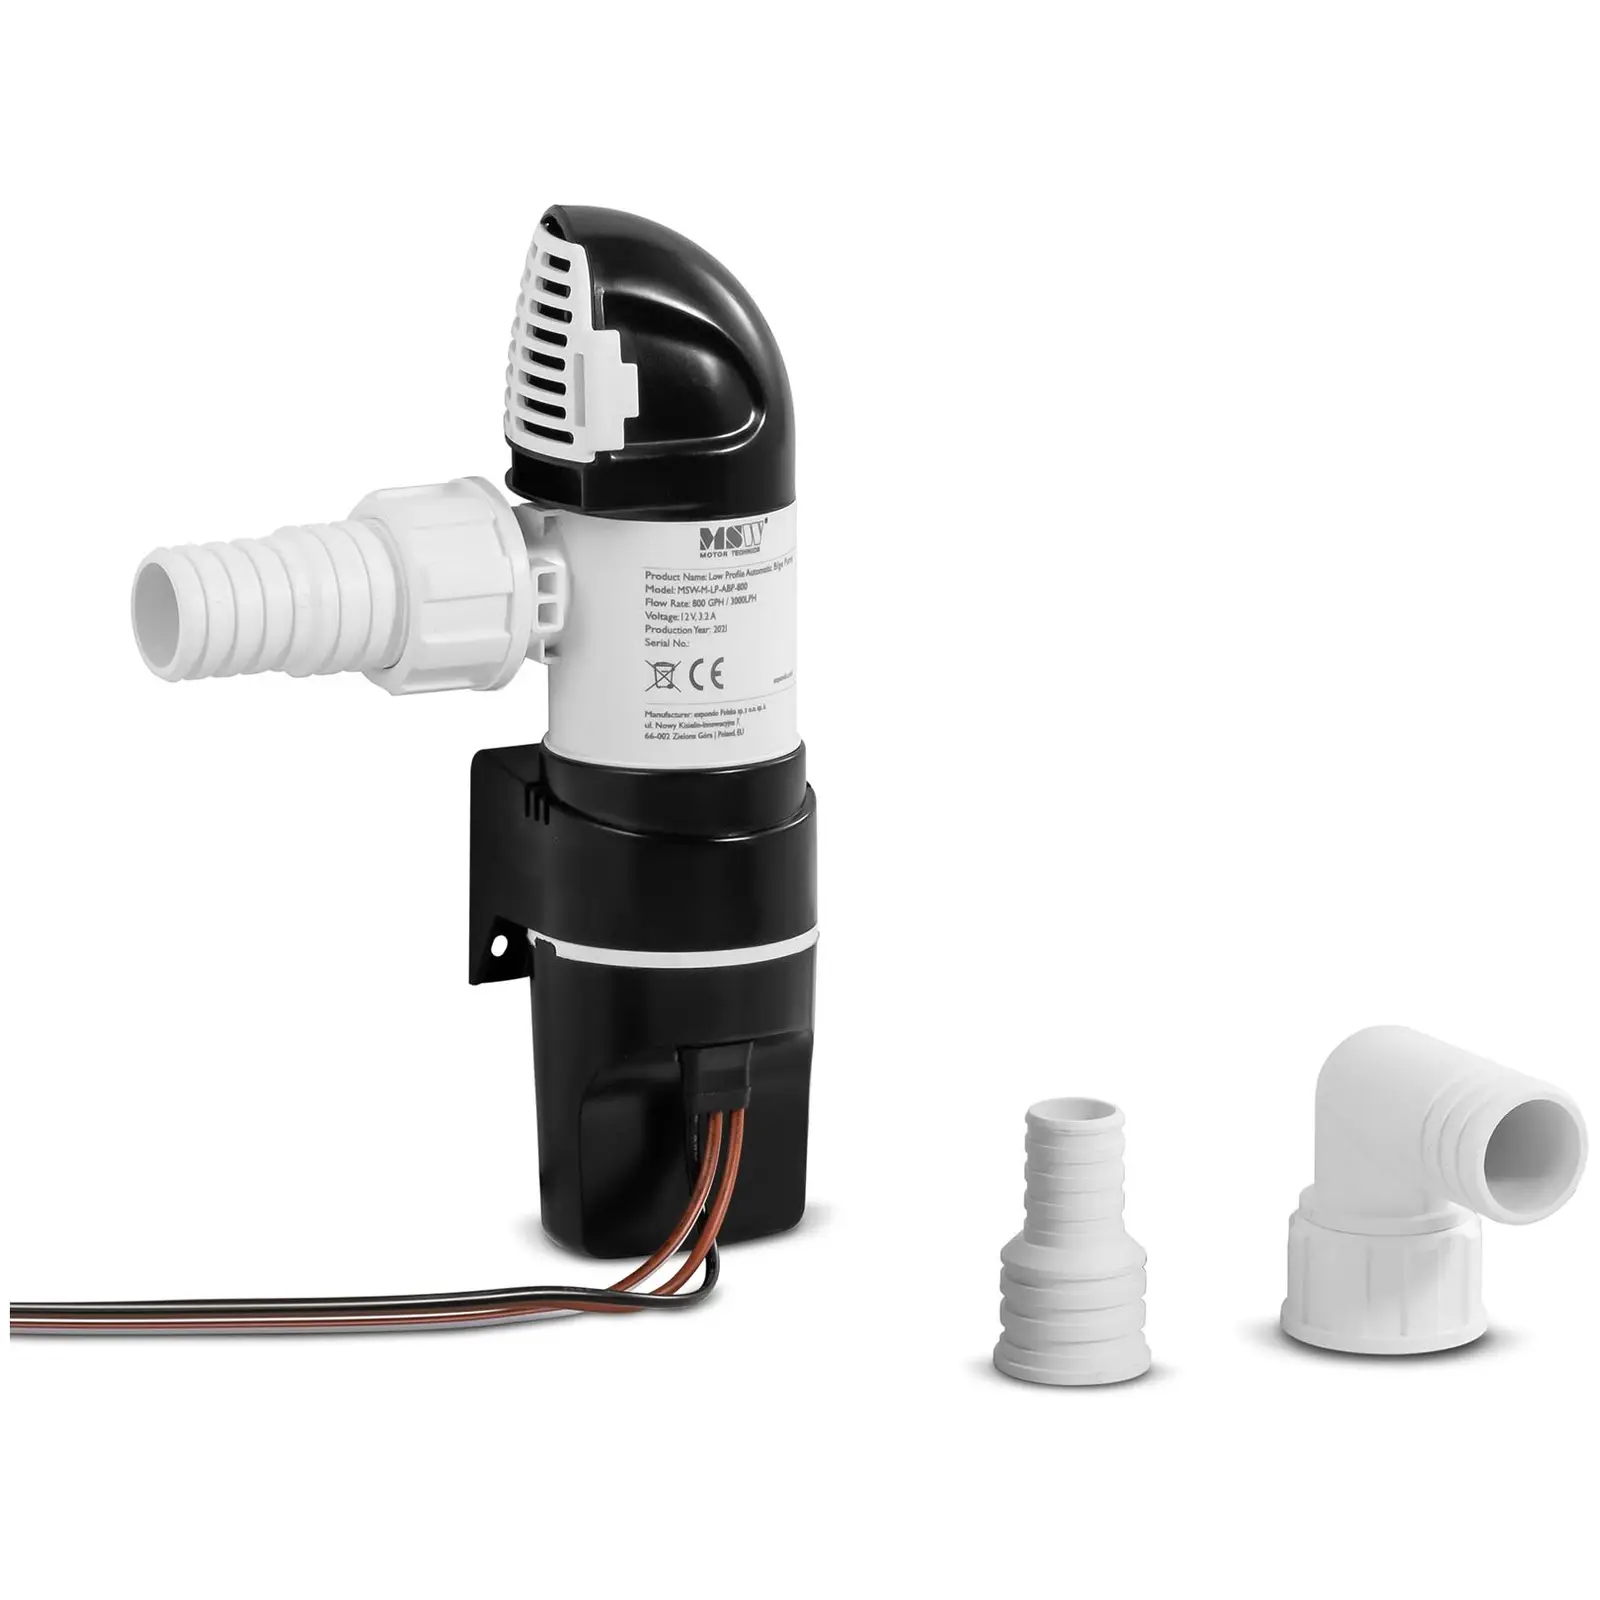 Automatic bilge pump with extra low profile - 3 m head - 50 l/min flow rate